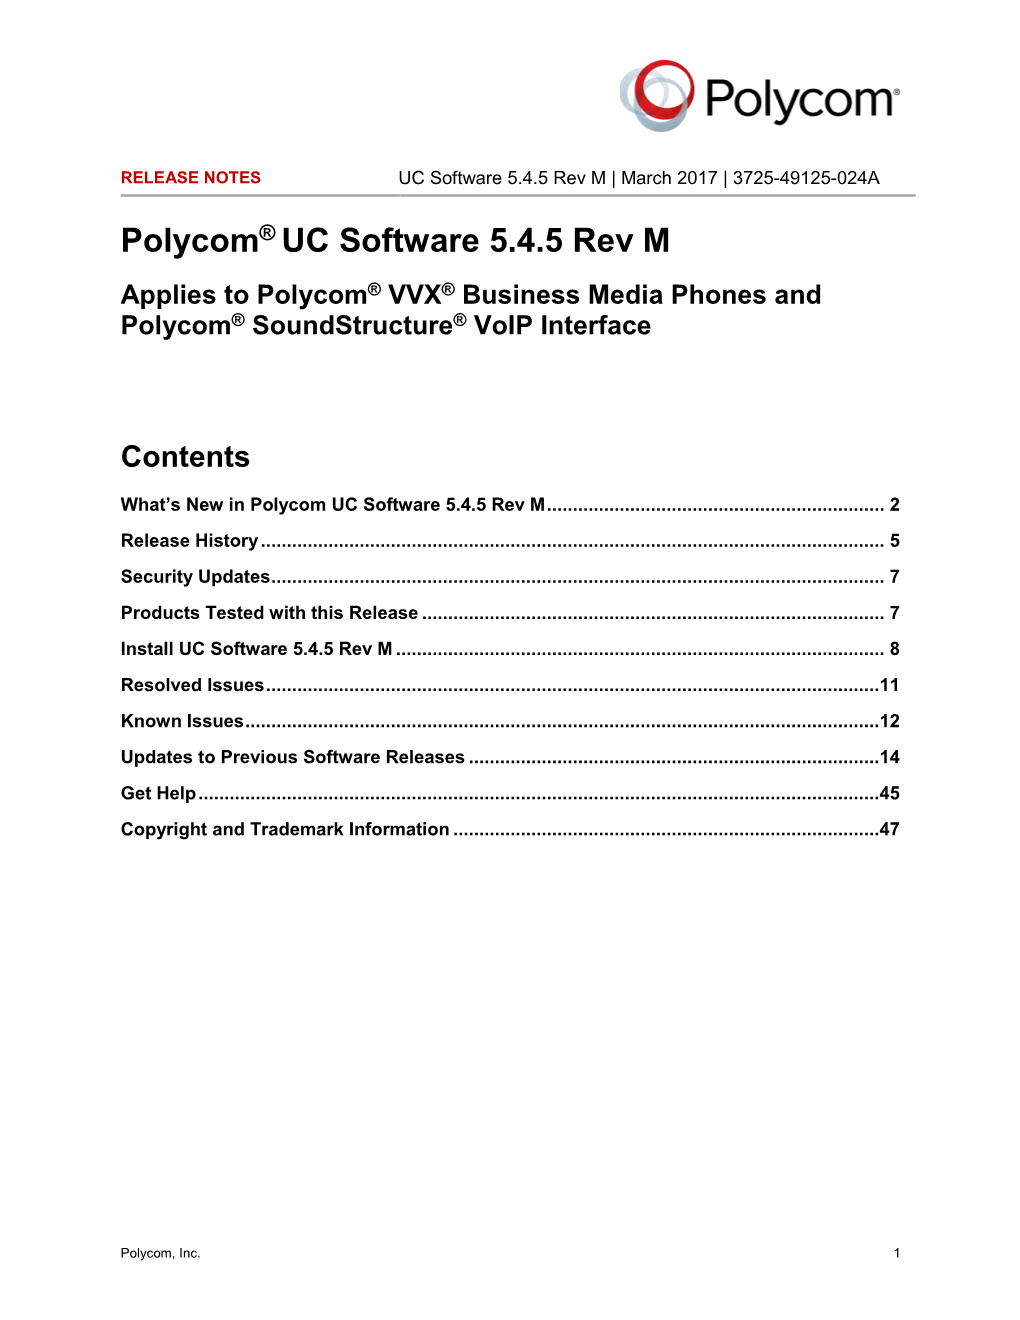 Release Notes for Polycom UC Software 5.4.5 Rev M